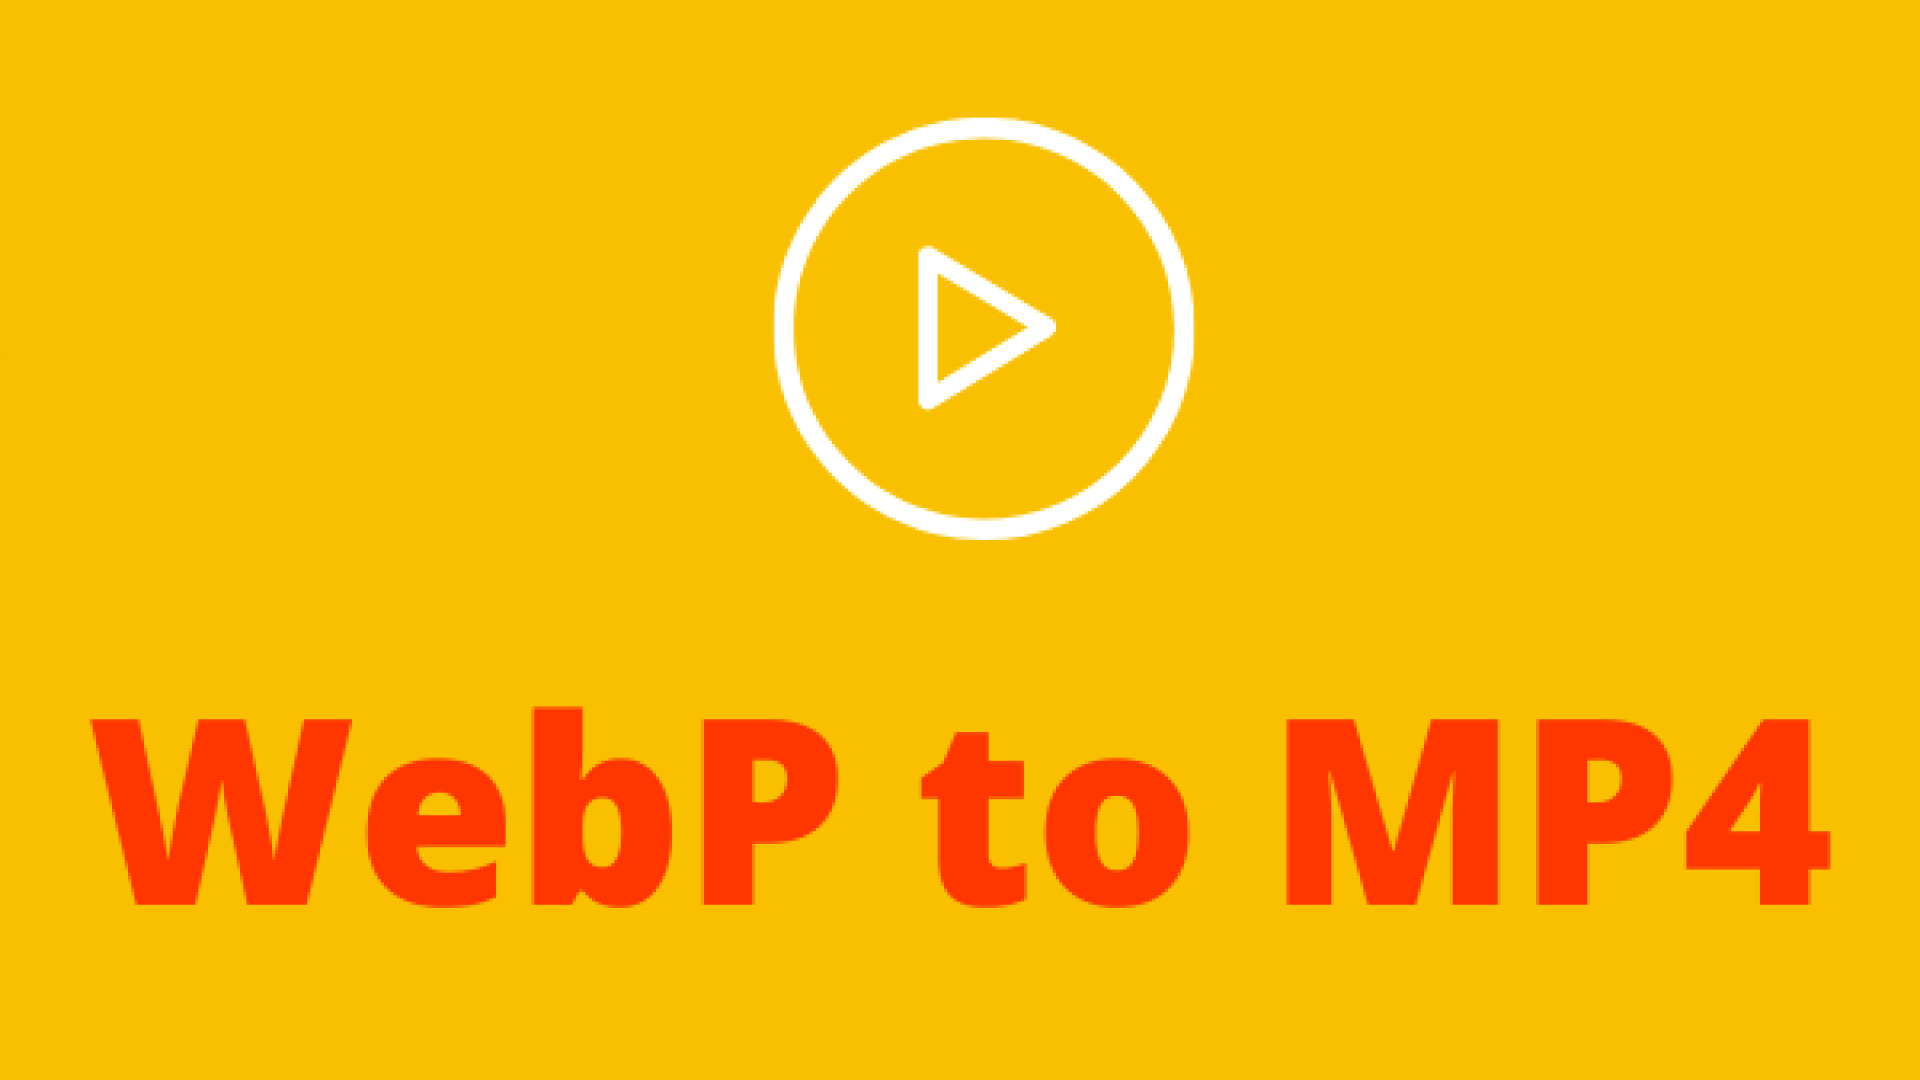 How to Convert WEBP to MP4 Quickly and Successfully?